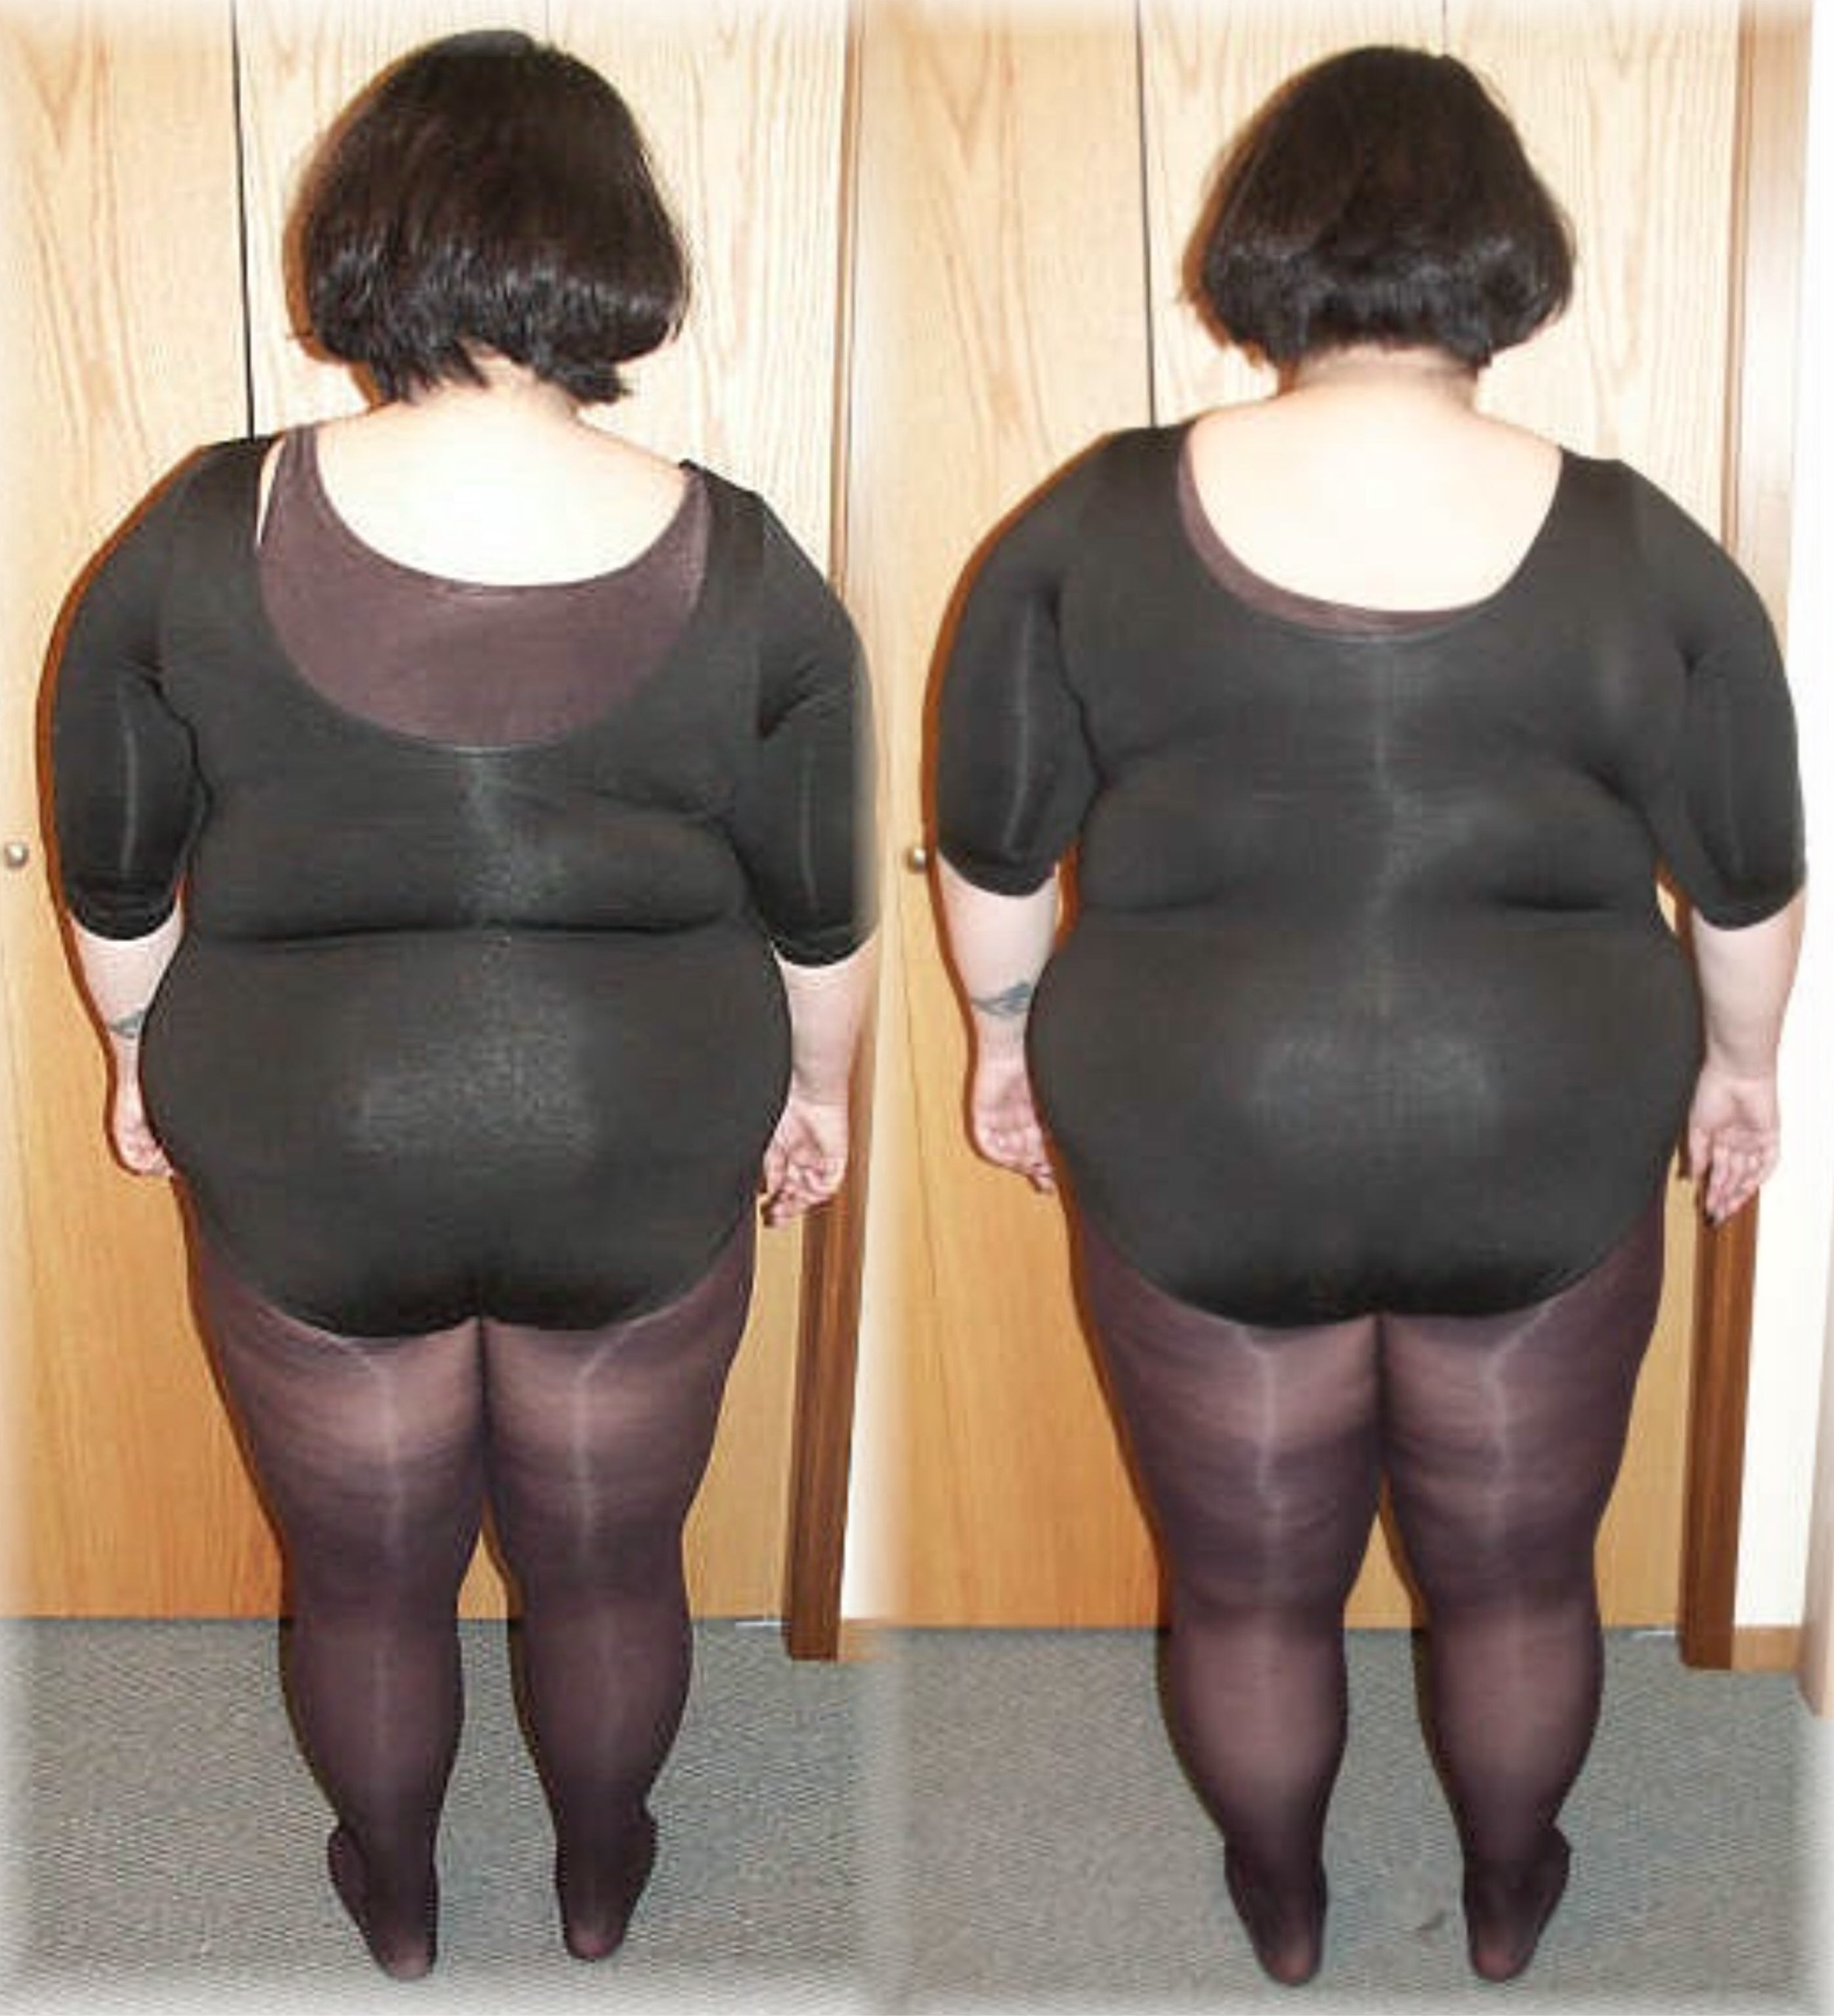 American Obesity Scene. plus size corset training before and after. 